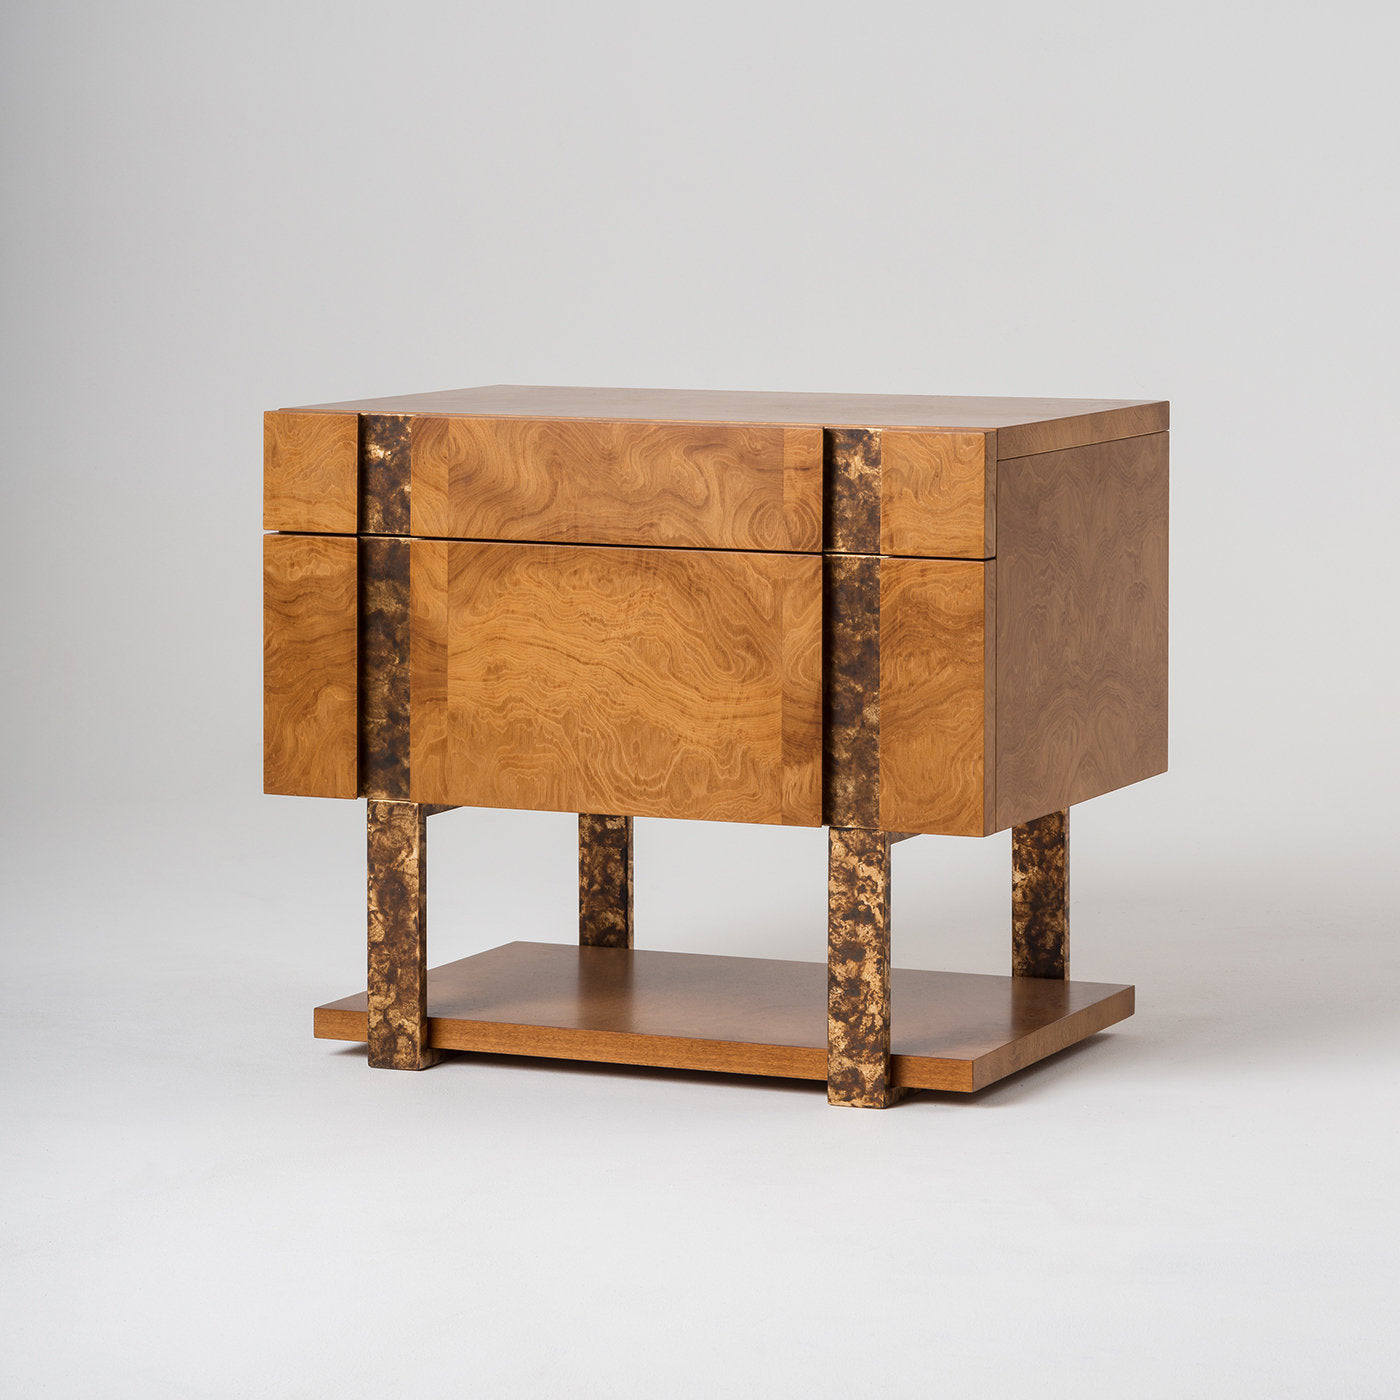 Diadema bedside table by Marco and Giulio Mantellassi - Alternative view 1